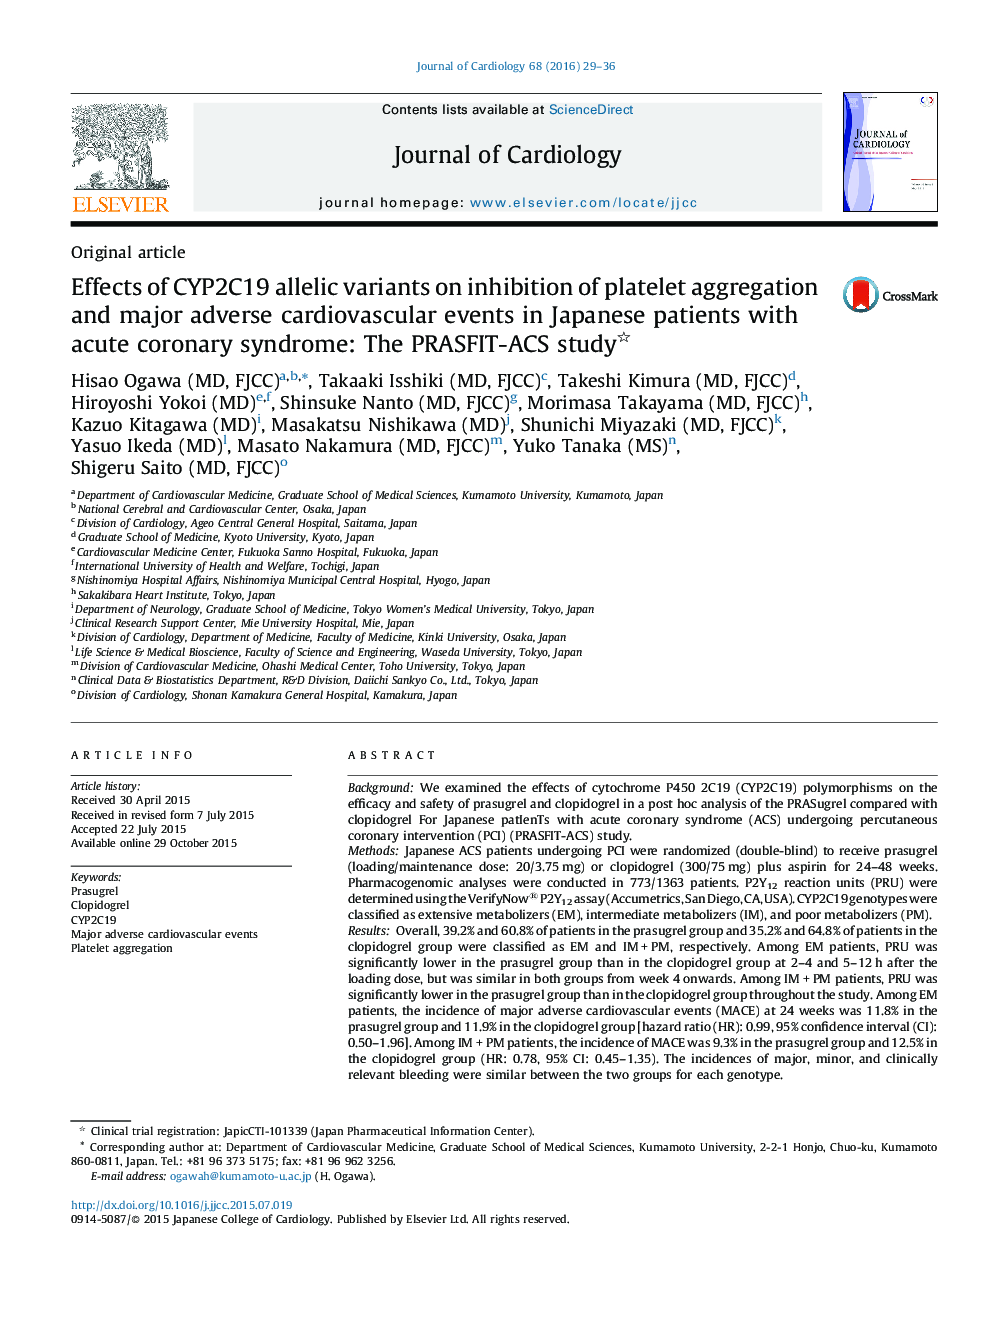 Effects of CYP2C19 allelic variants on inhibition of platelet aggregation and major adverse cardiovascular events in Japanese patients with acute coronary syndrome: The PRASFIT-ACS study 